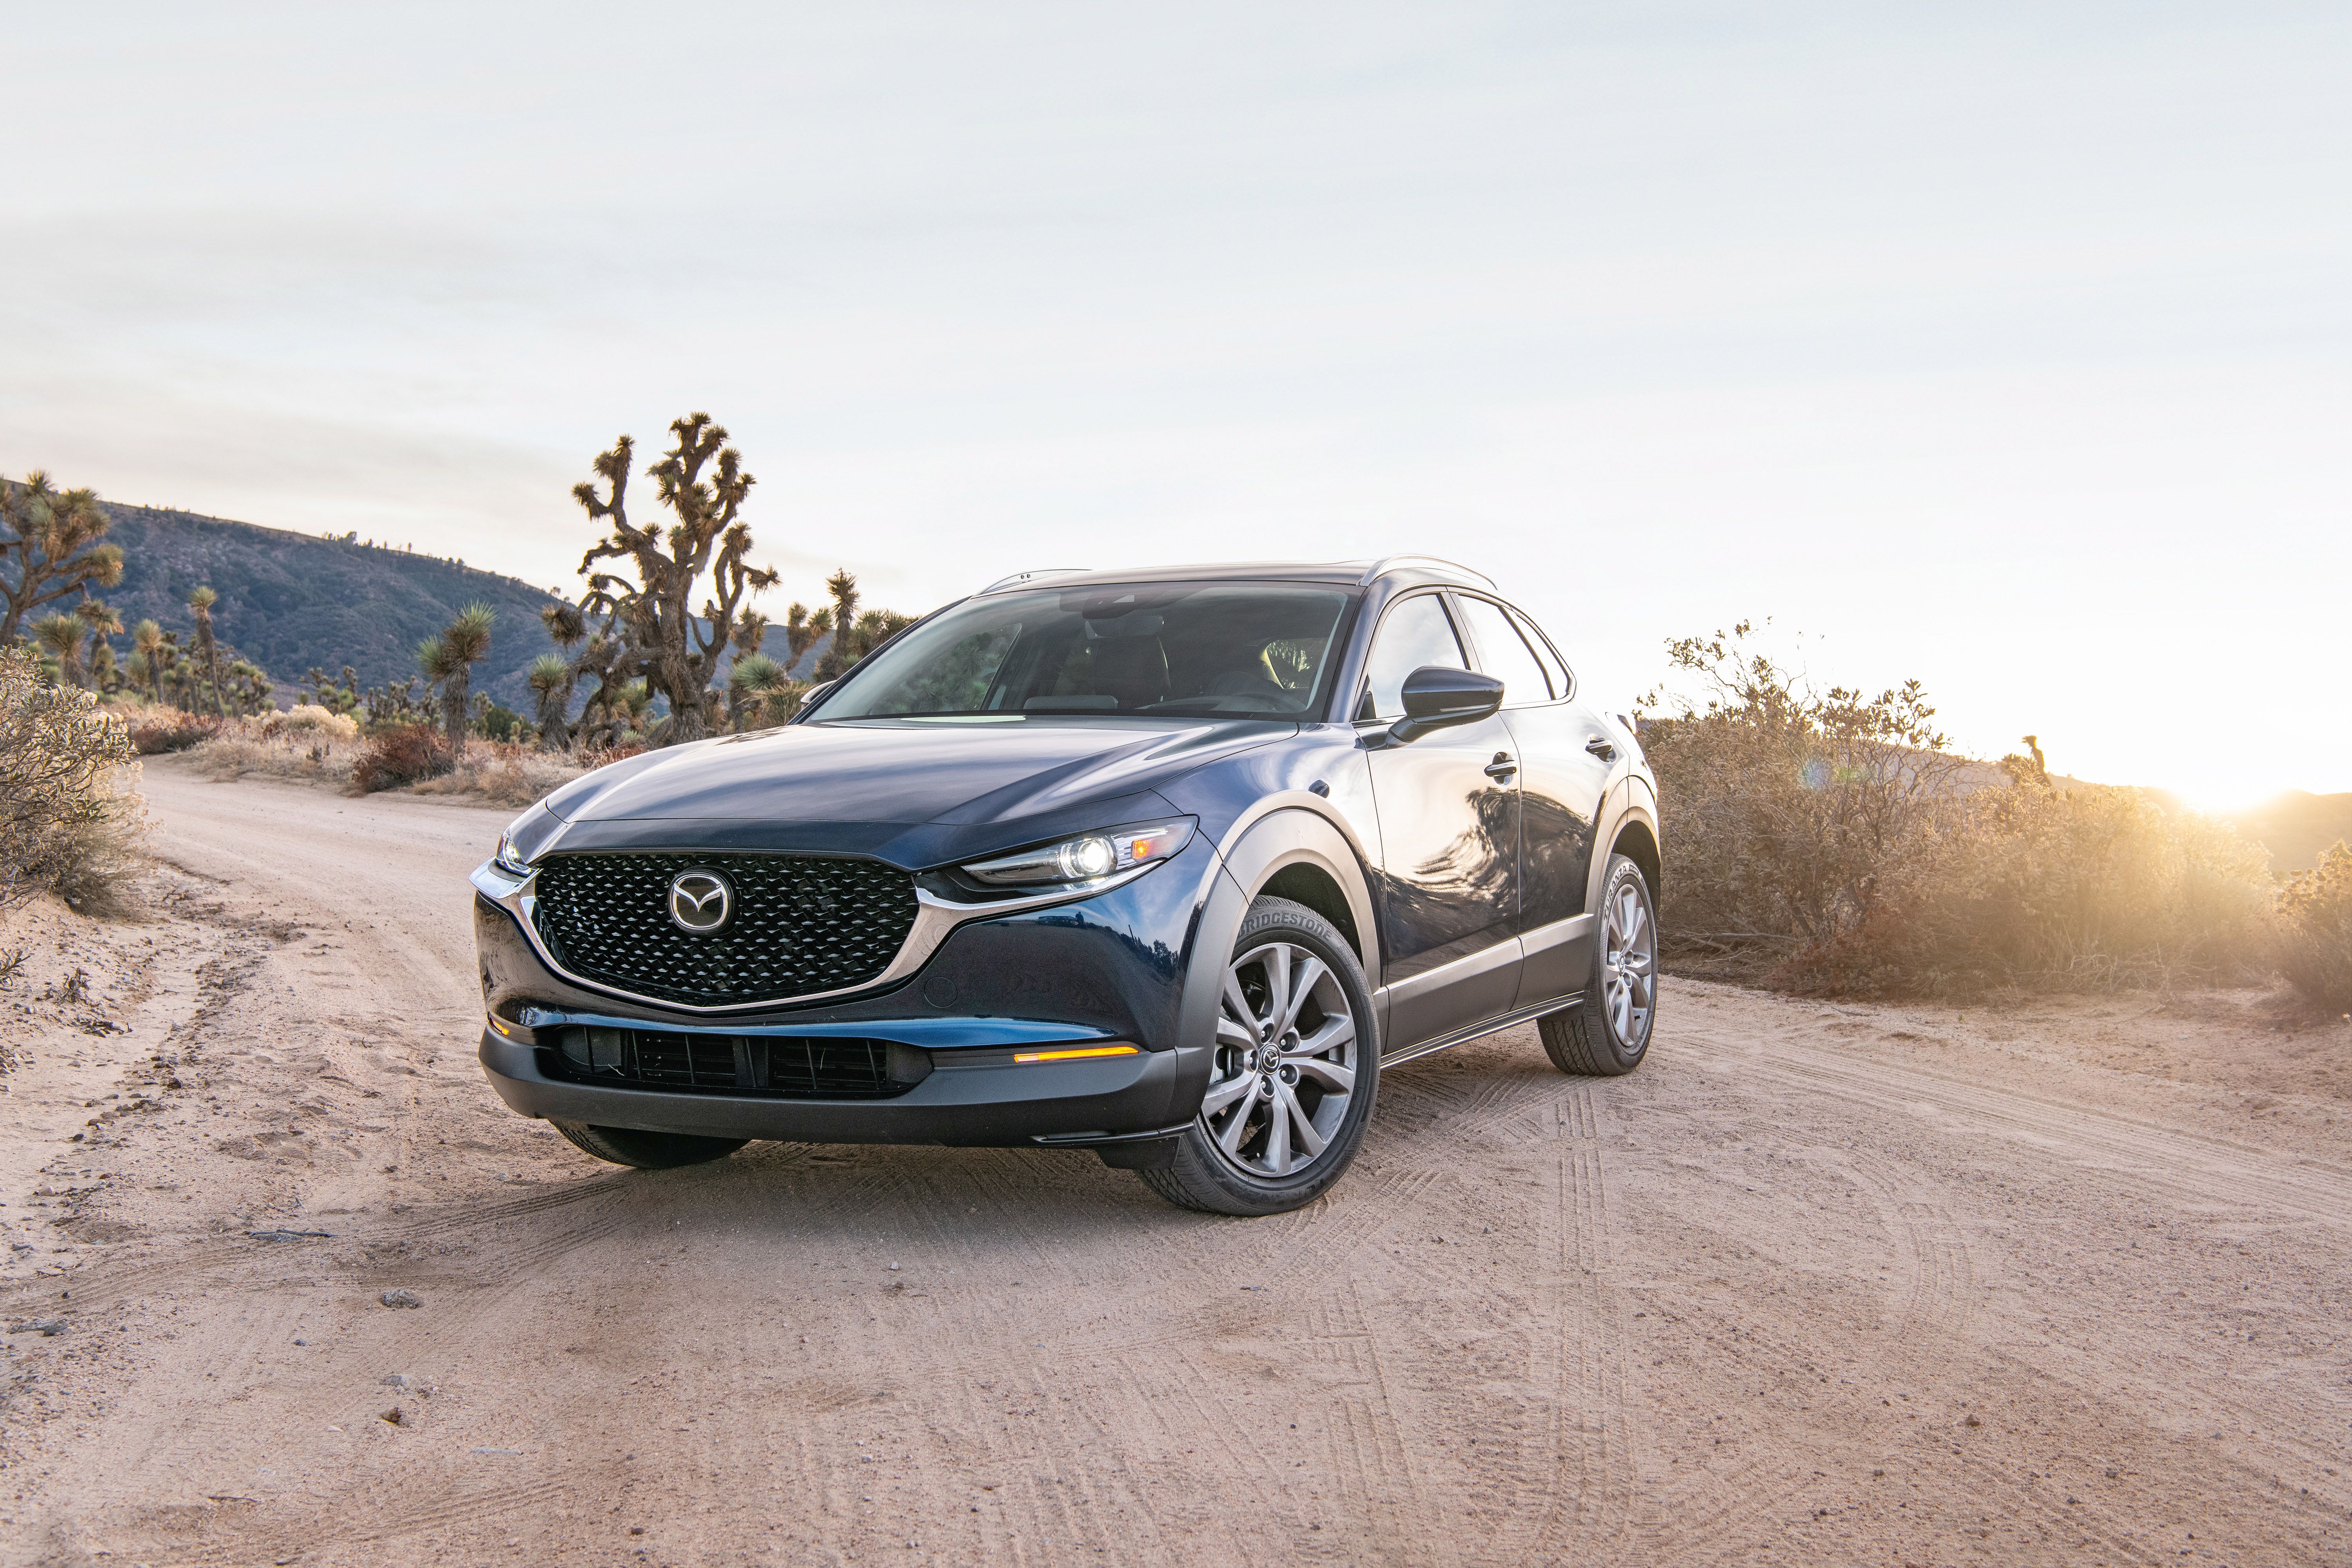 2020 Mazda CX-30 First Drive Review: Premium, Yet Affordable